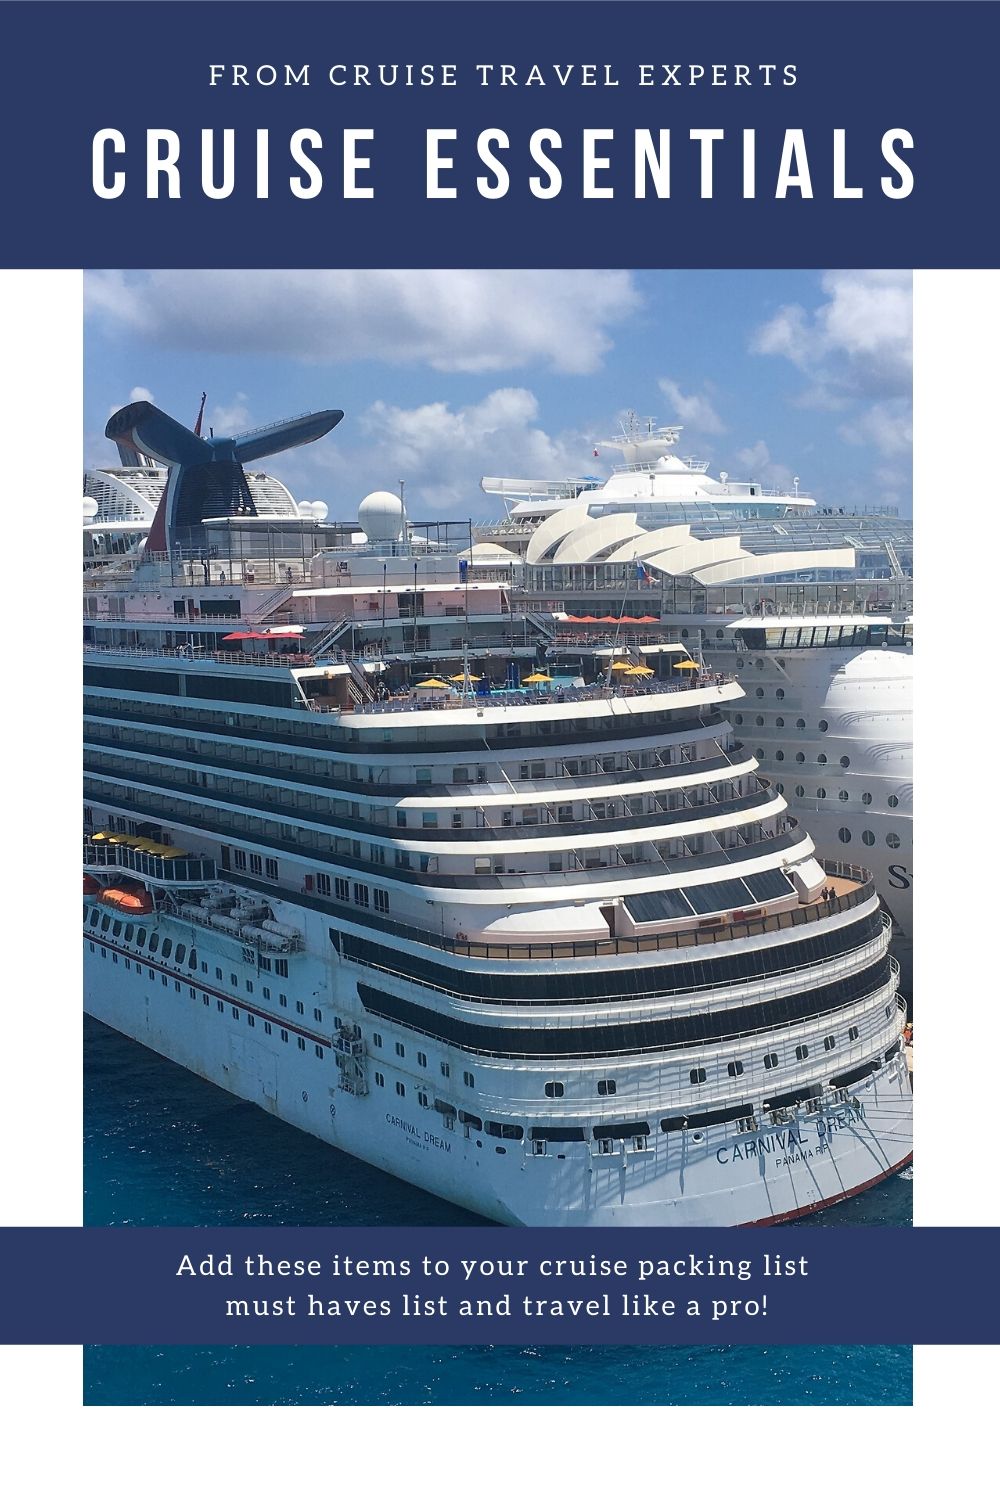 Packing for your first cruise? Check out our list of cruise essentials, items that make the most of your limited space, help with organization, and take the stress out of your cruise vacation experience. These make the trip more fun!  
 #cruiseessentials #cruiseessentialslist #cruiseessentialsamazon #cruiseessentialspackinglist #cruisetips #cruisepackingtips #cruiseextras #thingstopackforacruise #cruisetipsfirsttime #cruisetipspackinglist #cruisetipsandtricks via @karendawkins